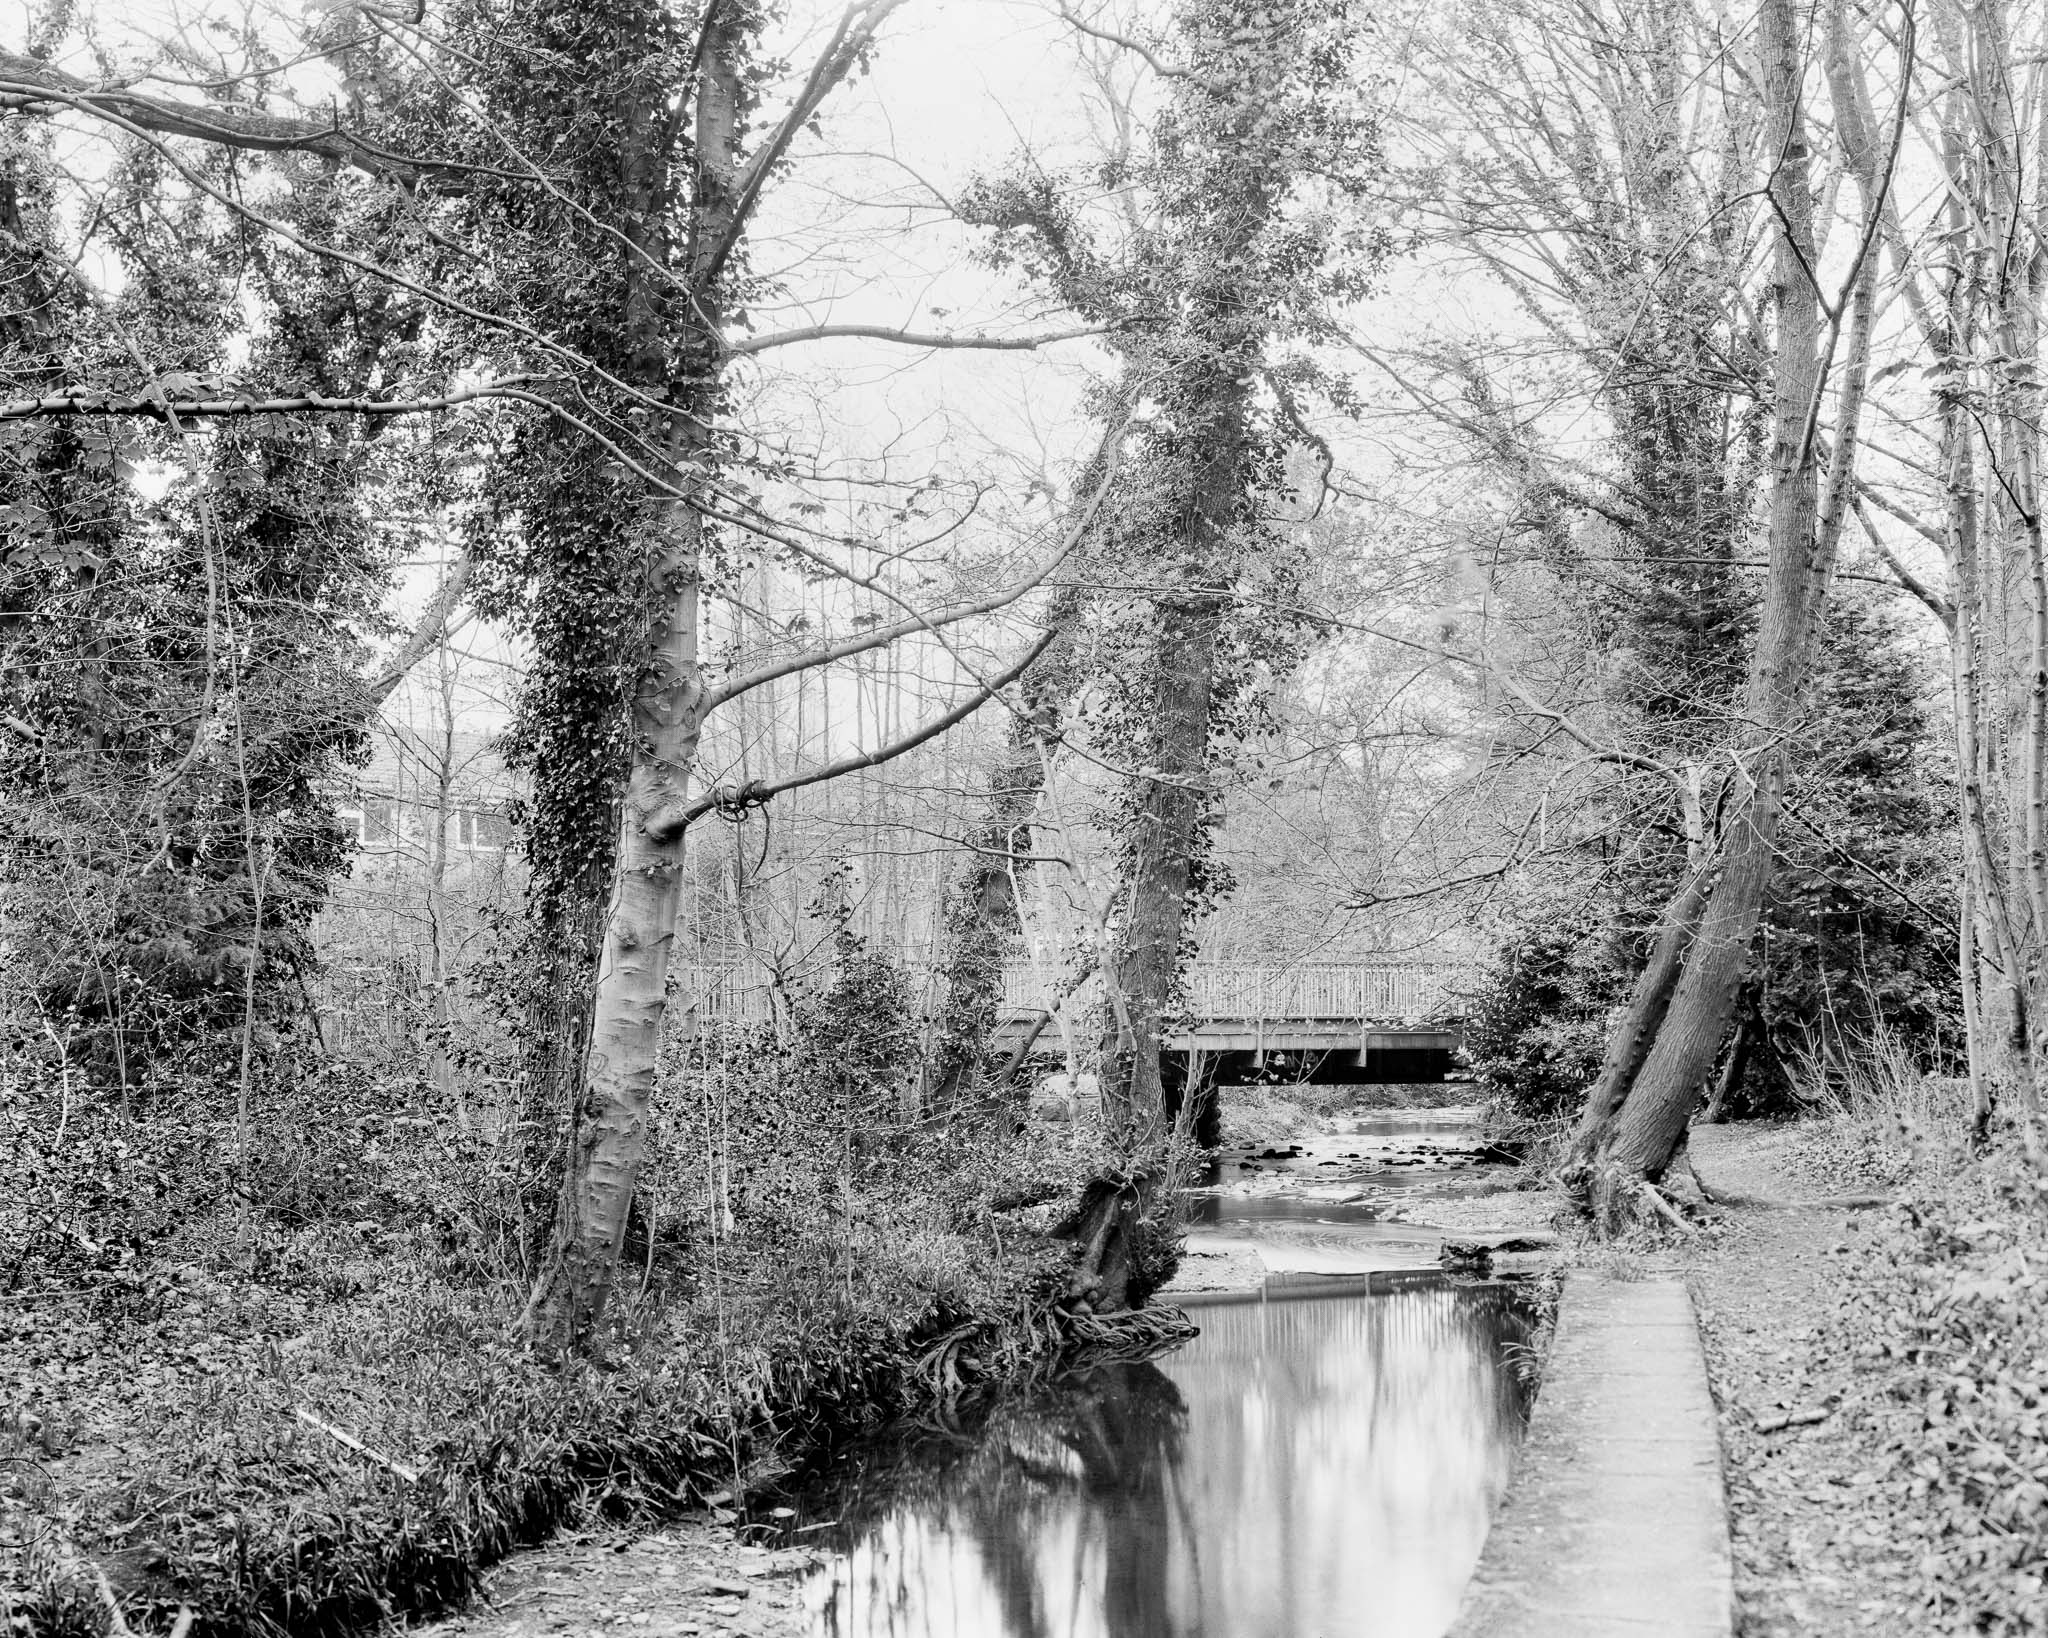 Black and White Photograph of The River Sheaf, Sheffield by Jonny Sutton, 2022